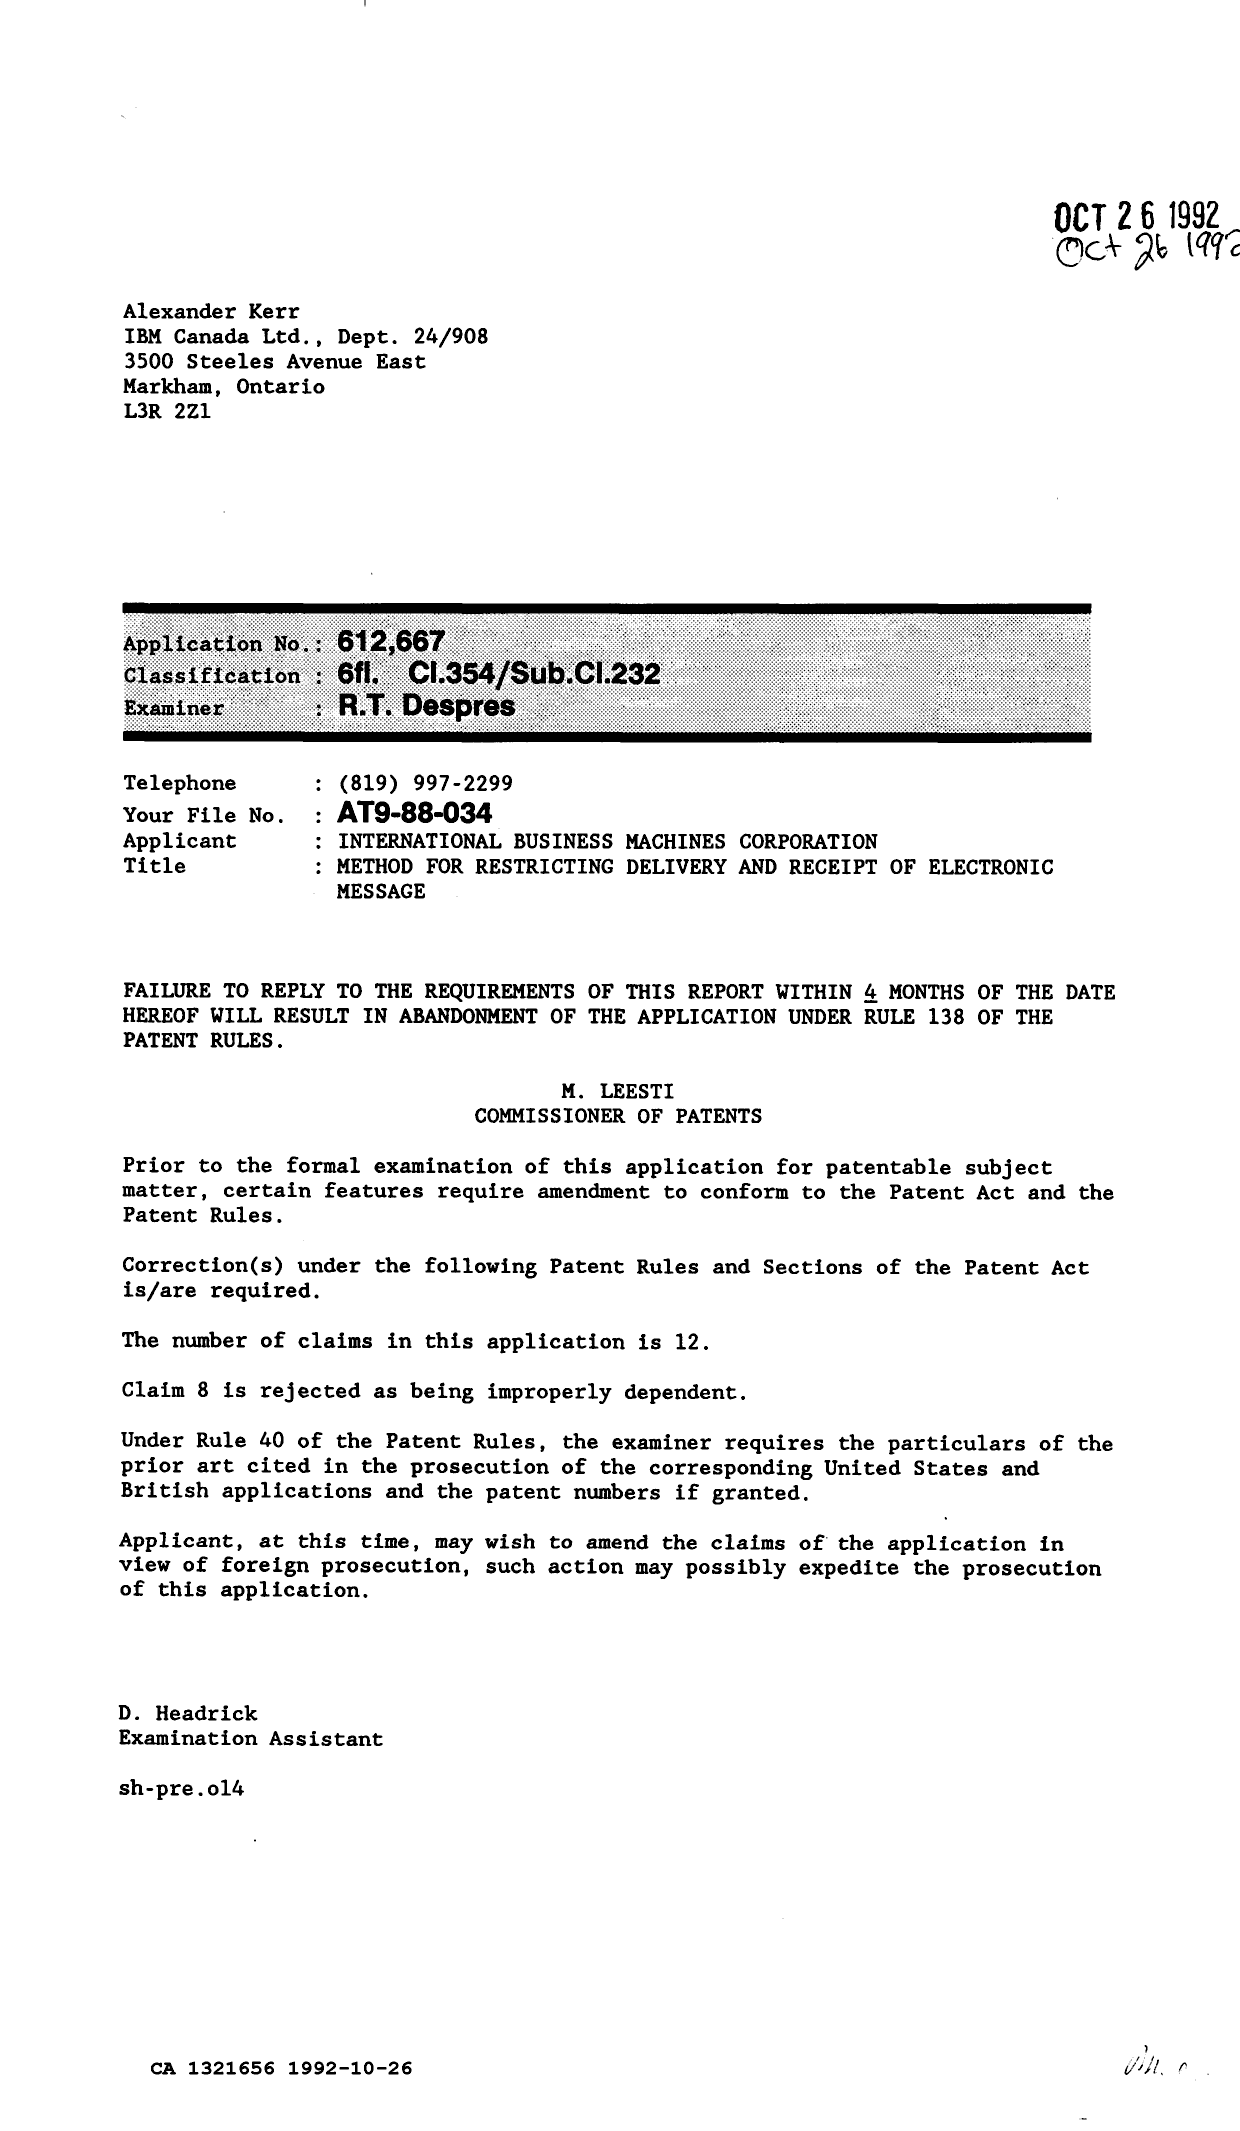 Canadian Patent Document 1321656. Examiner Requisition 19921026. Image 1 of 1